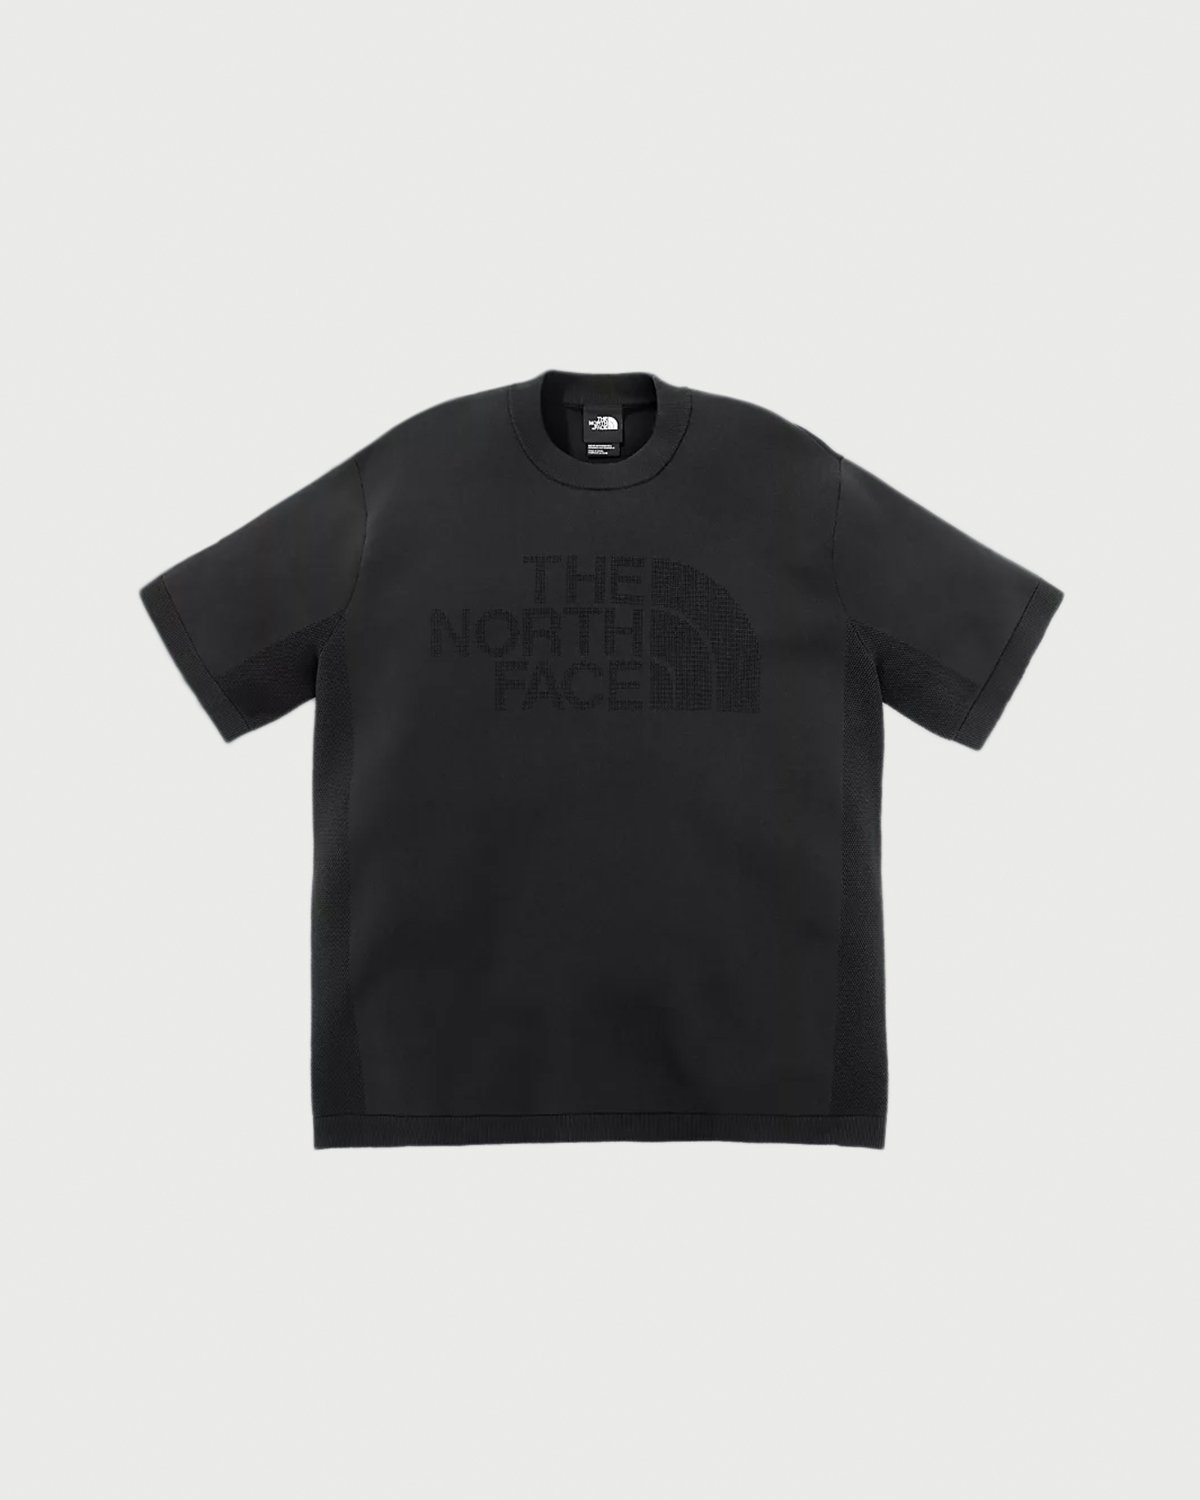 The North Face - Black Series Engineered Knit T-Shirt Black - Clothing - Black - Image 1